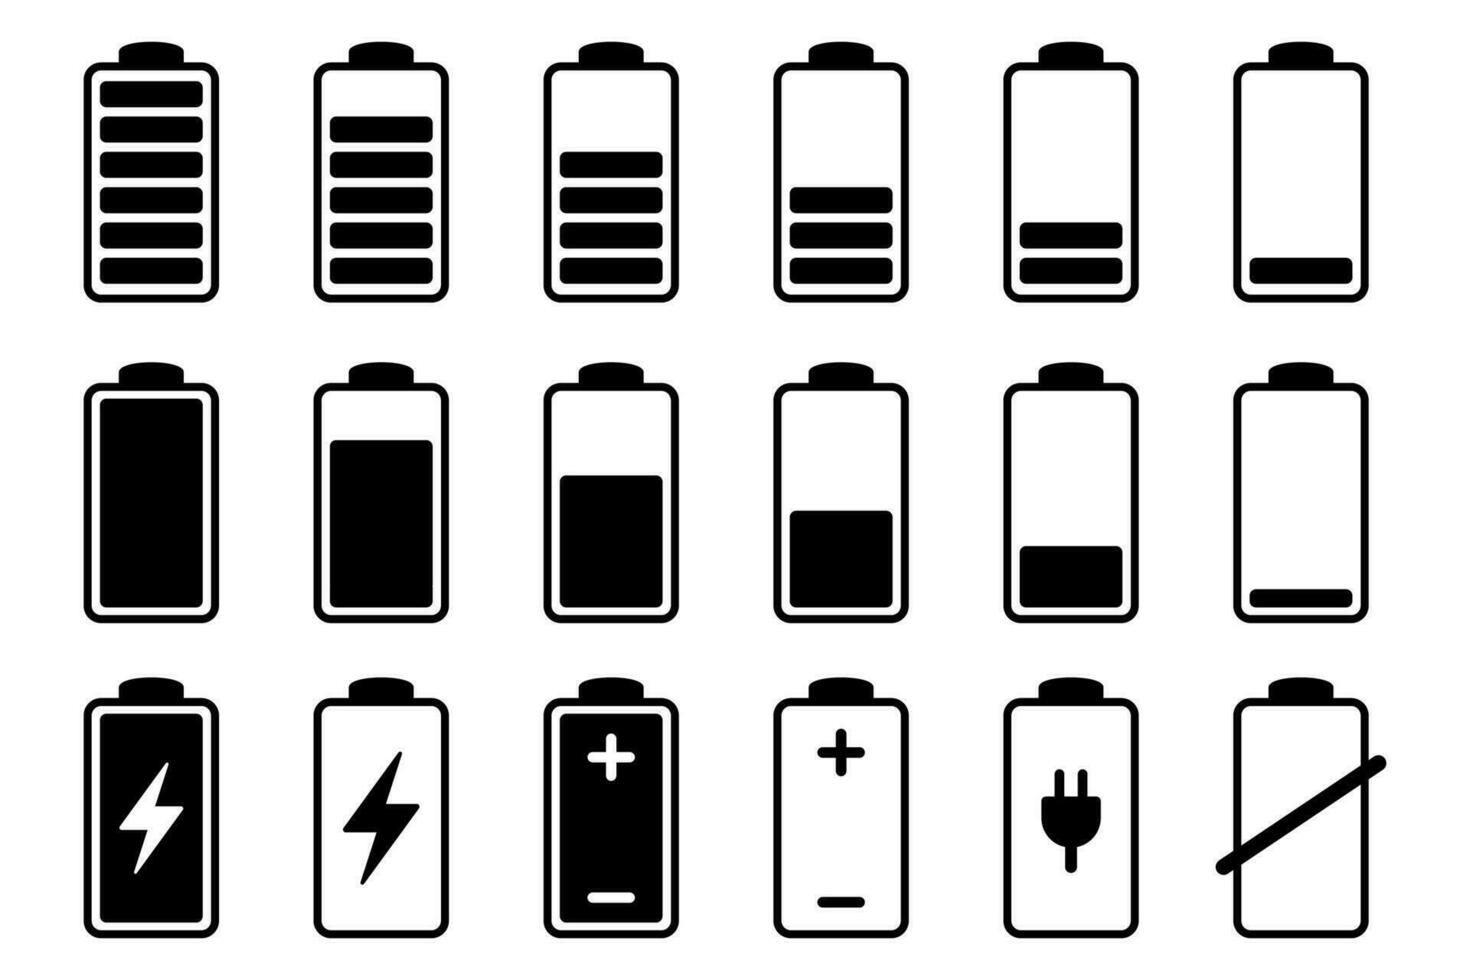 Battery charging icon. Battery charge indicator icons, vector graphics